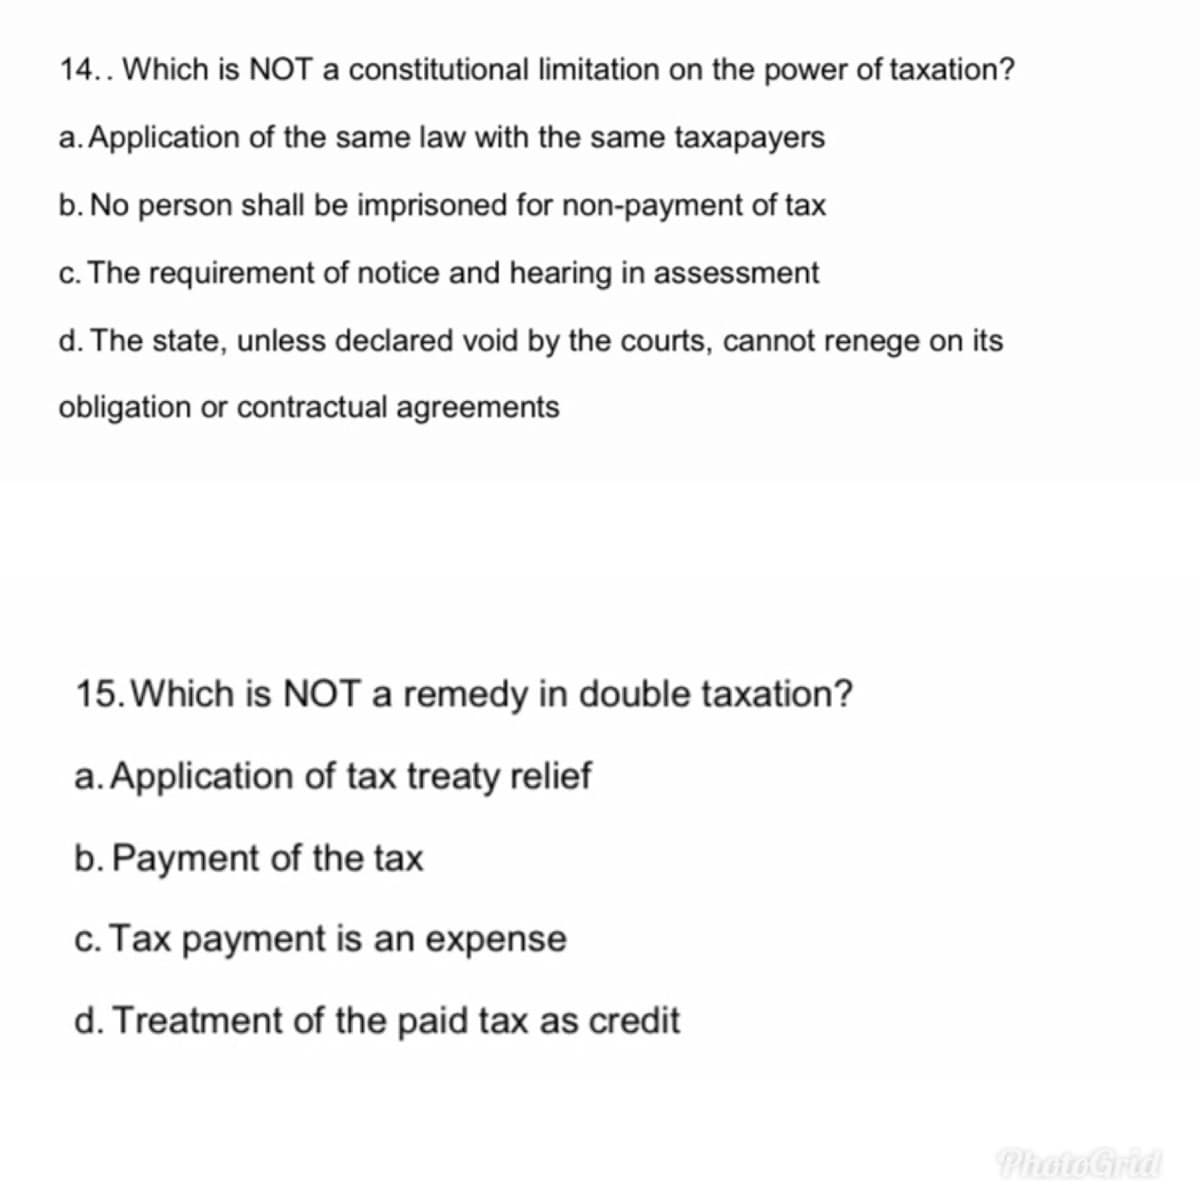 14.. Which is NOT a constitutional limitation on the power of taxation?
a. Application of the same law with the same taxapayers
b. No person shall be imprisoned for non-payment of tax
c. The requirement of notice and hearing in assessment
d. The state, unless declared void by the courts, cannot renege on its
obligation or contractual agreements
15. Which is NOTa remedy in double taxation?
a.Application of tax treaty relief
b. Payment of the tax
c. Tax payment is an expense
d. Treatment of the paid tax as credit
Photo Grid
